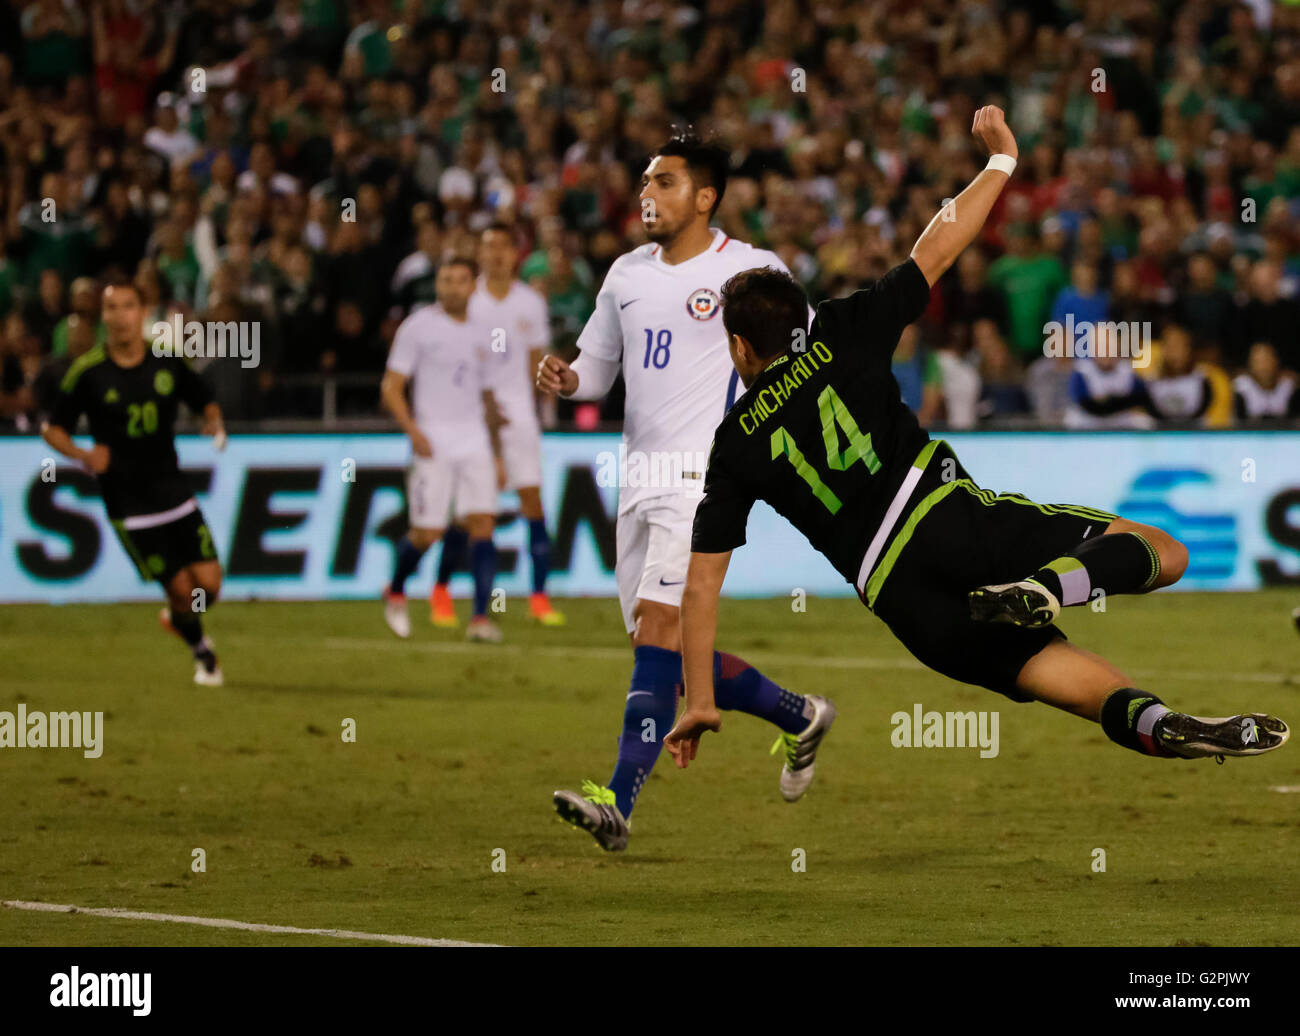 San Diego, California, USA. 01st June, 2016. Mexican Forward #14 Javier ''Chicharito'' Hernandez heads the ball into the goal during an international soccer match between Mexico and Chile at Qualcomm Stadium in San Diego, California. Mexico defeats Chile 1-0. Justin Cooper/CSM/Alamy Live News Stock Photo